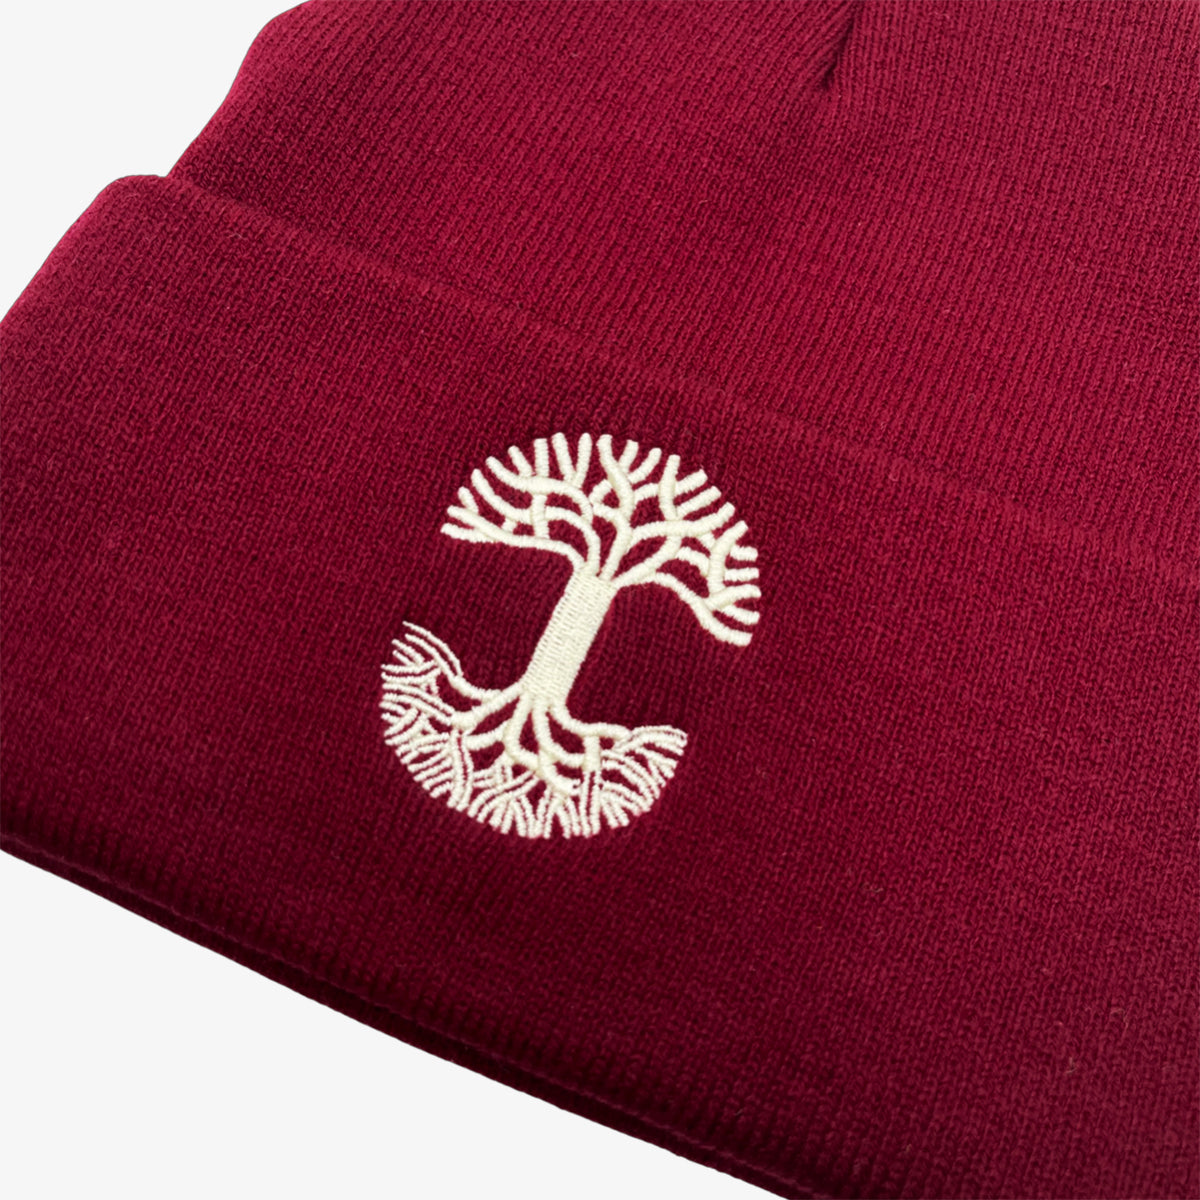 Close-up of white embroidered Oaklandish tree logo on the cuff of a burgundy beanie.